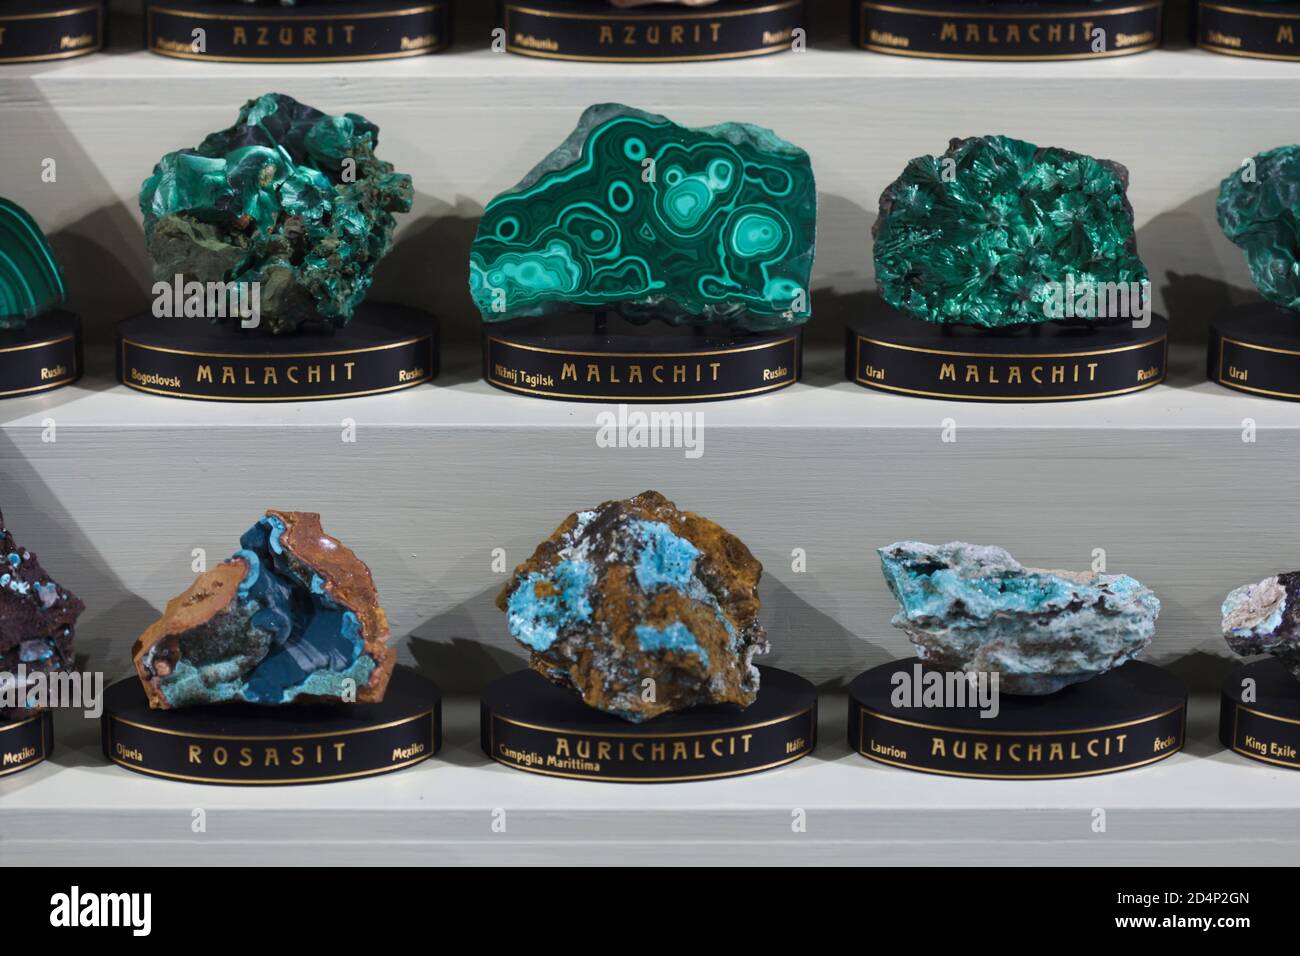 Malachite from different mineral deposits in the Urals Mountains (Russia) on display in the Hall of Minerals in the National Museum (Národní muzeum) in Prague, Czech Republic. Stock Photo